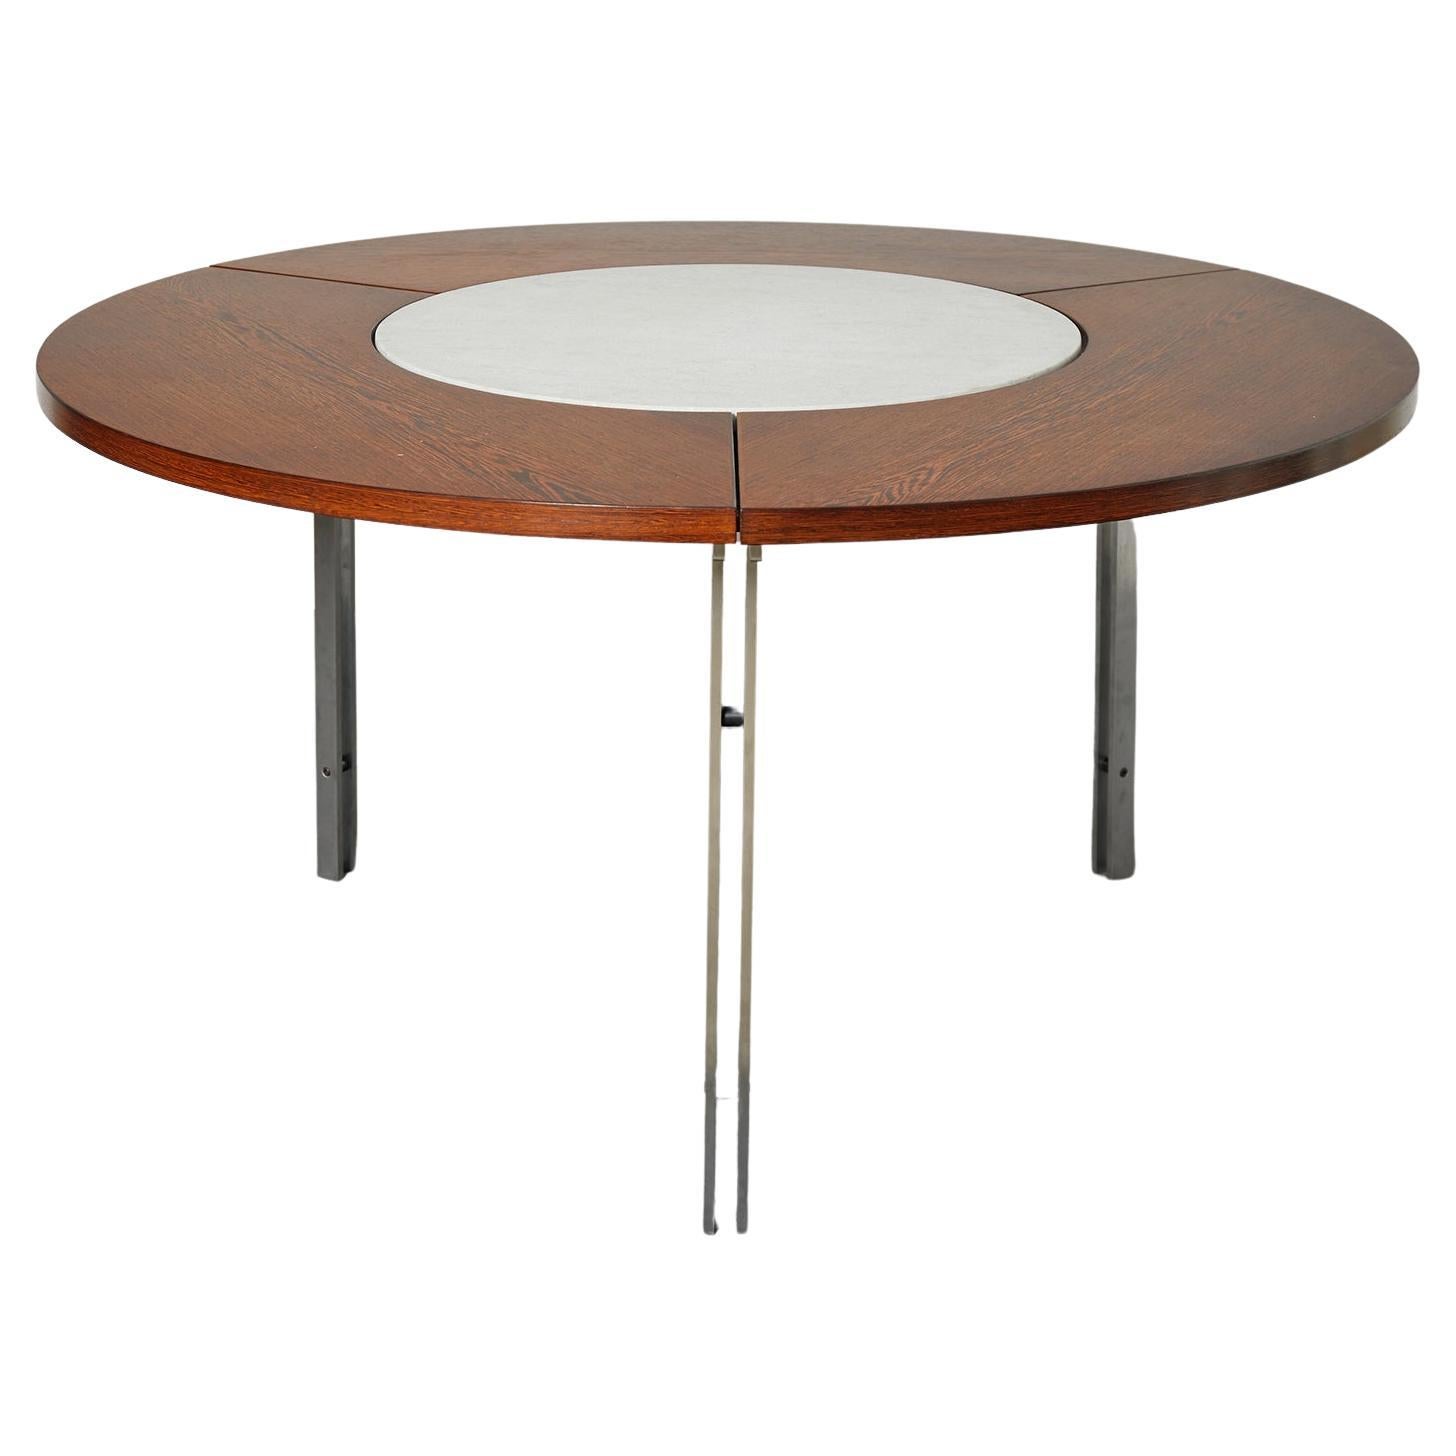 Fabricius Kastholm Dining or Conference Table by Alfred Kill, Germany, 1965 For Sale